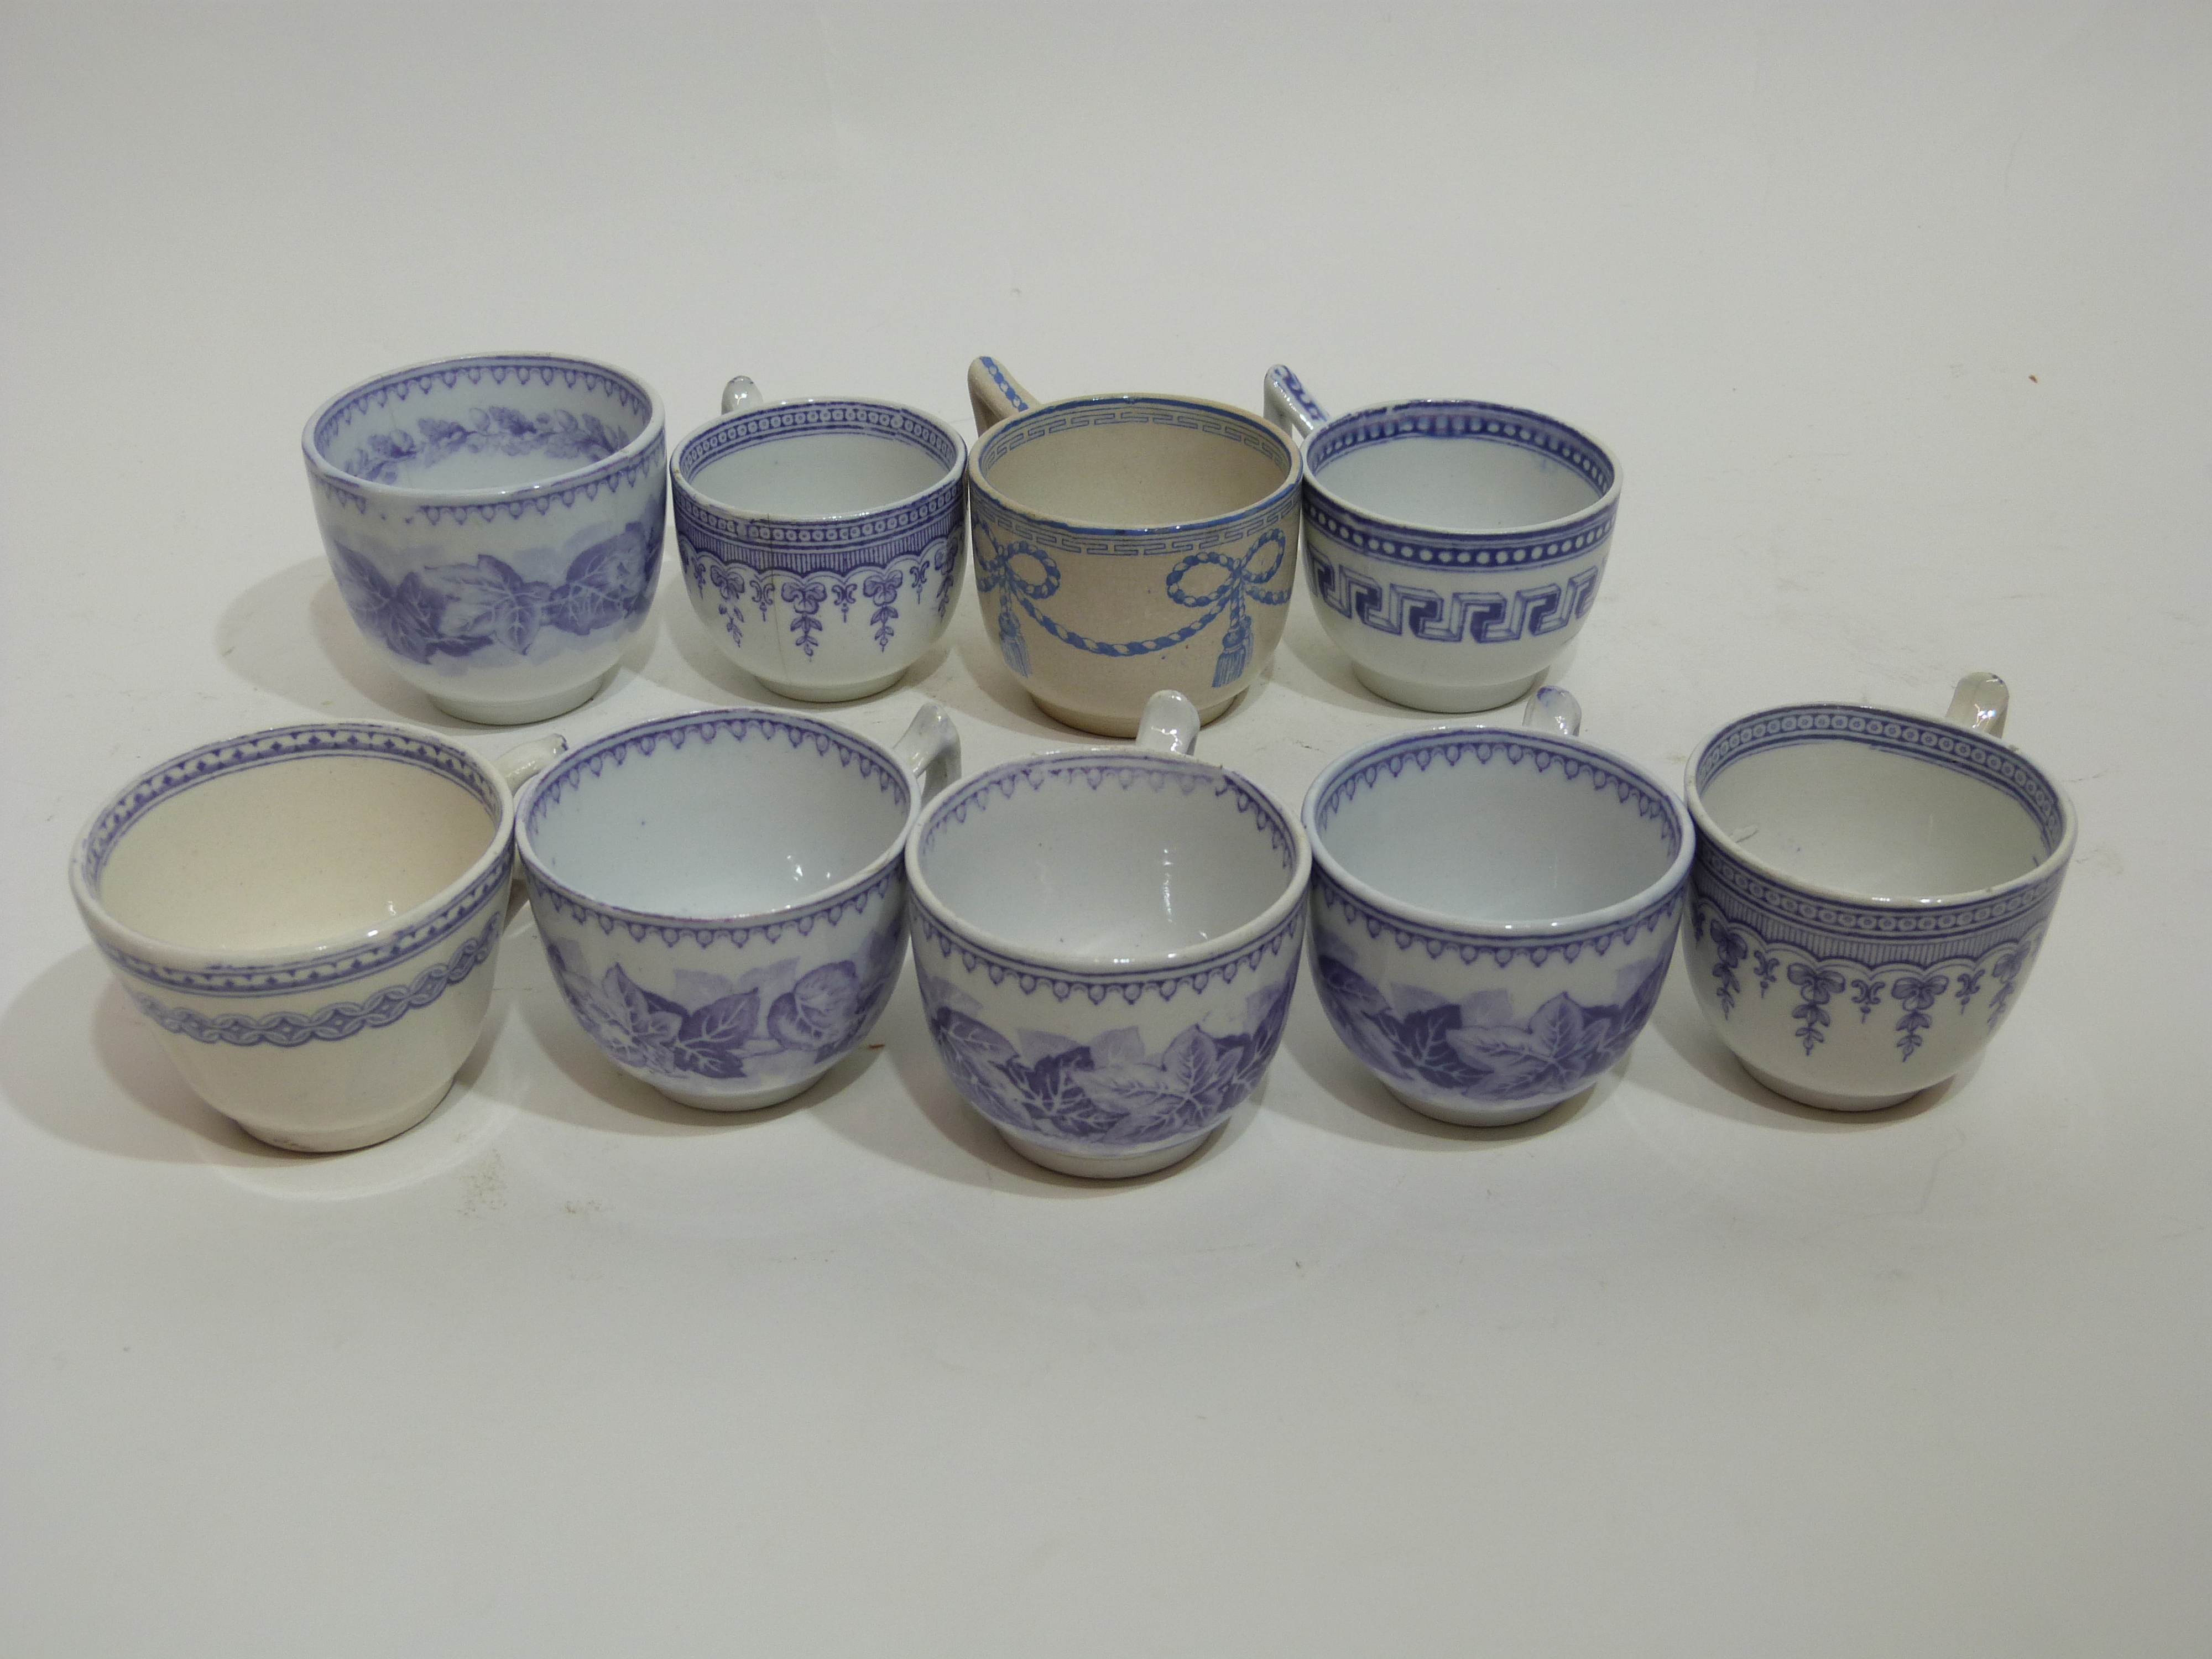 Victorian miniature tea set with blue floral decoration including tea cups and saucers - Image 2 of 4